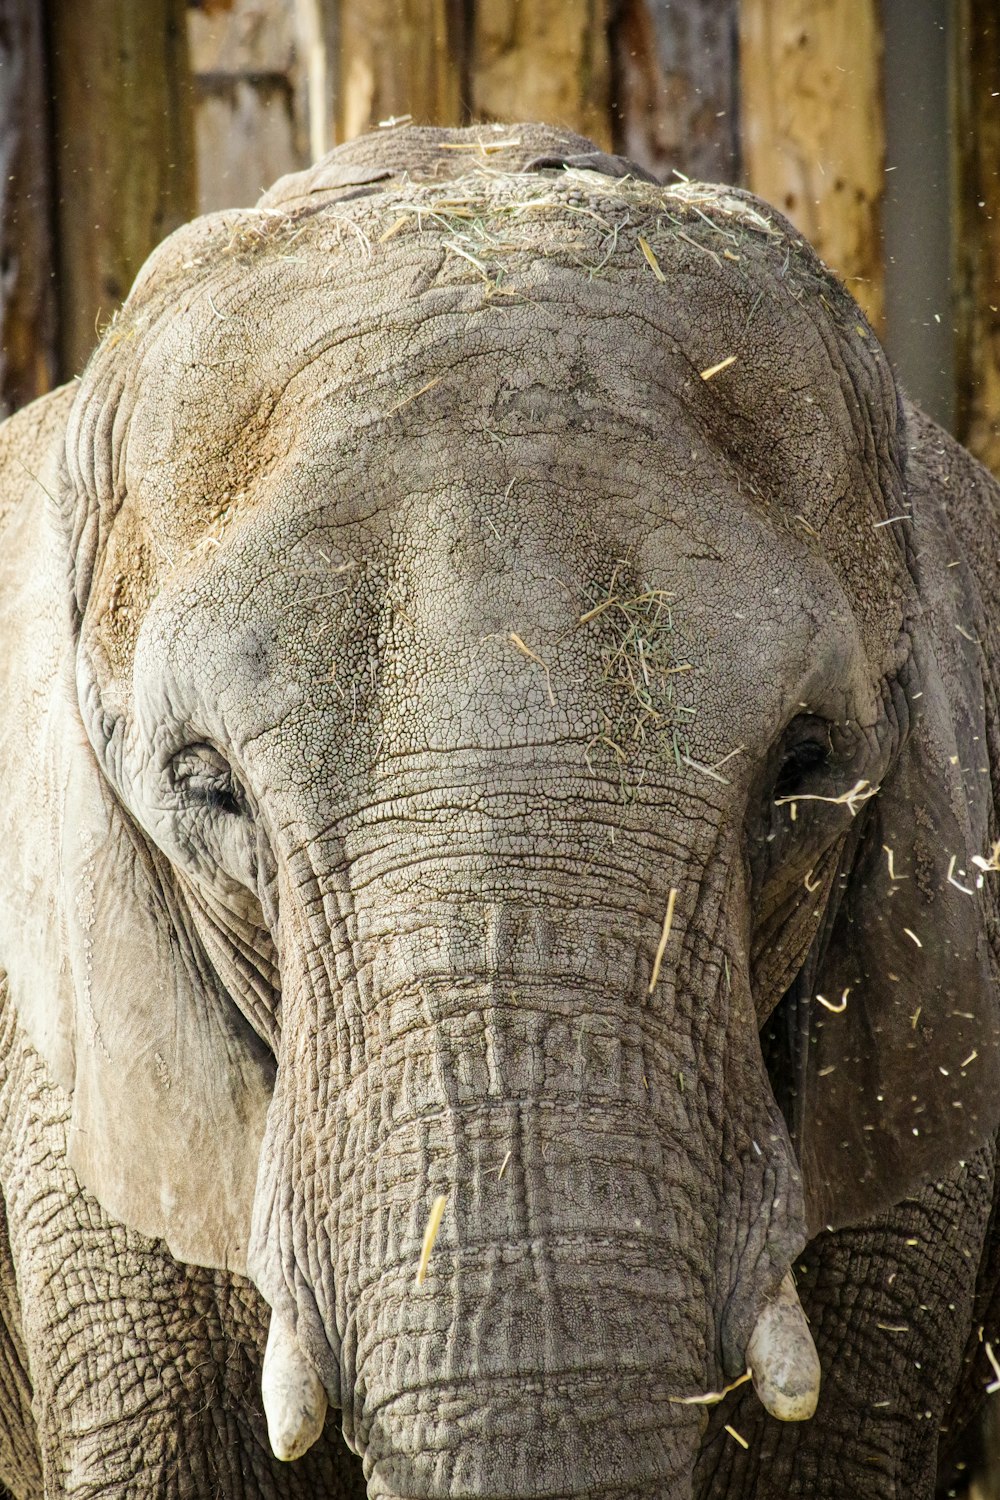 a close up of an elephant eating hay